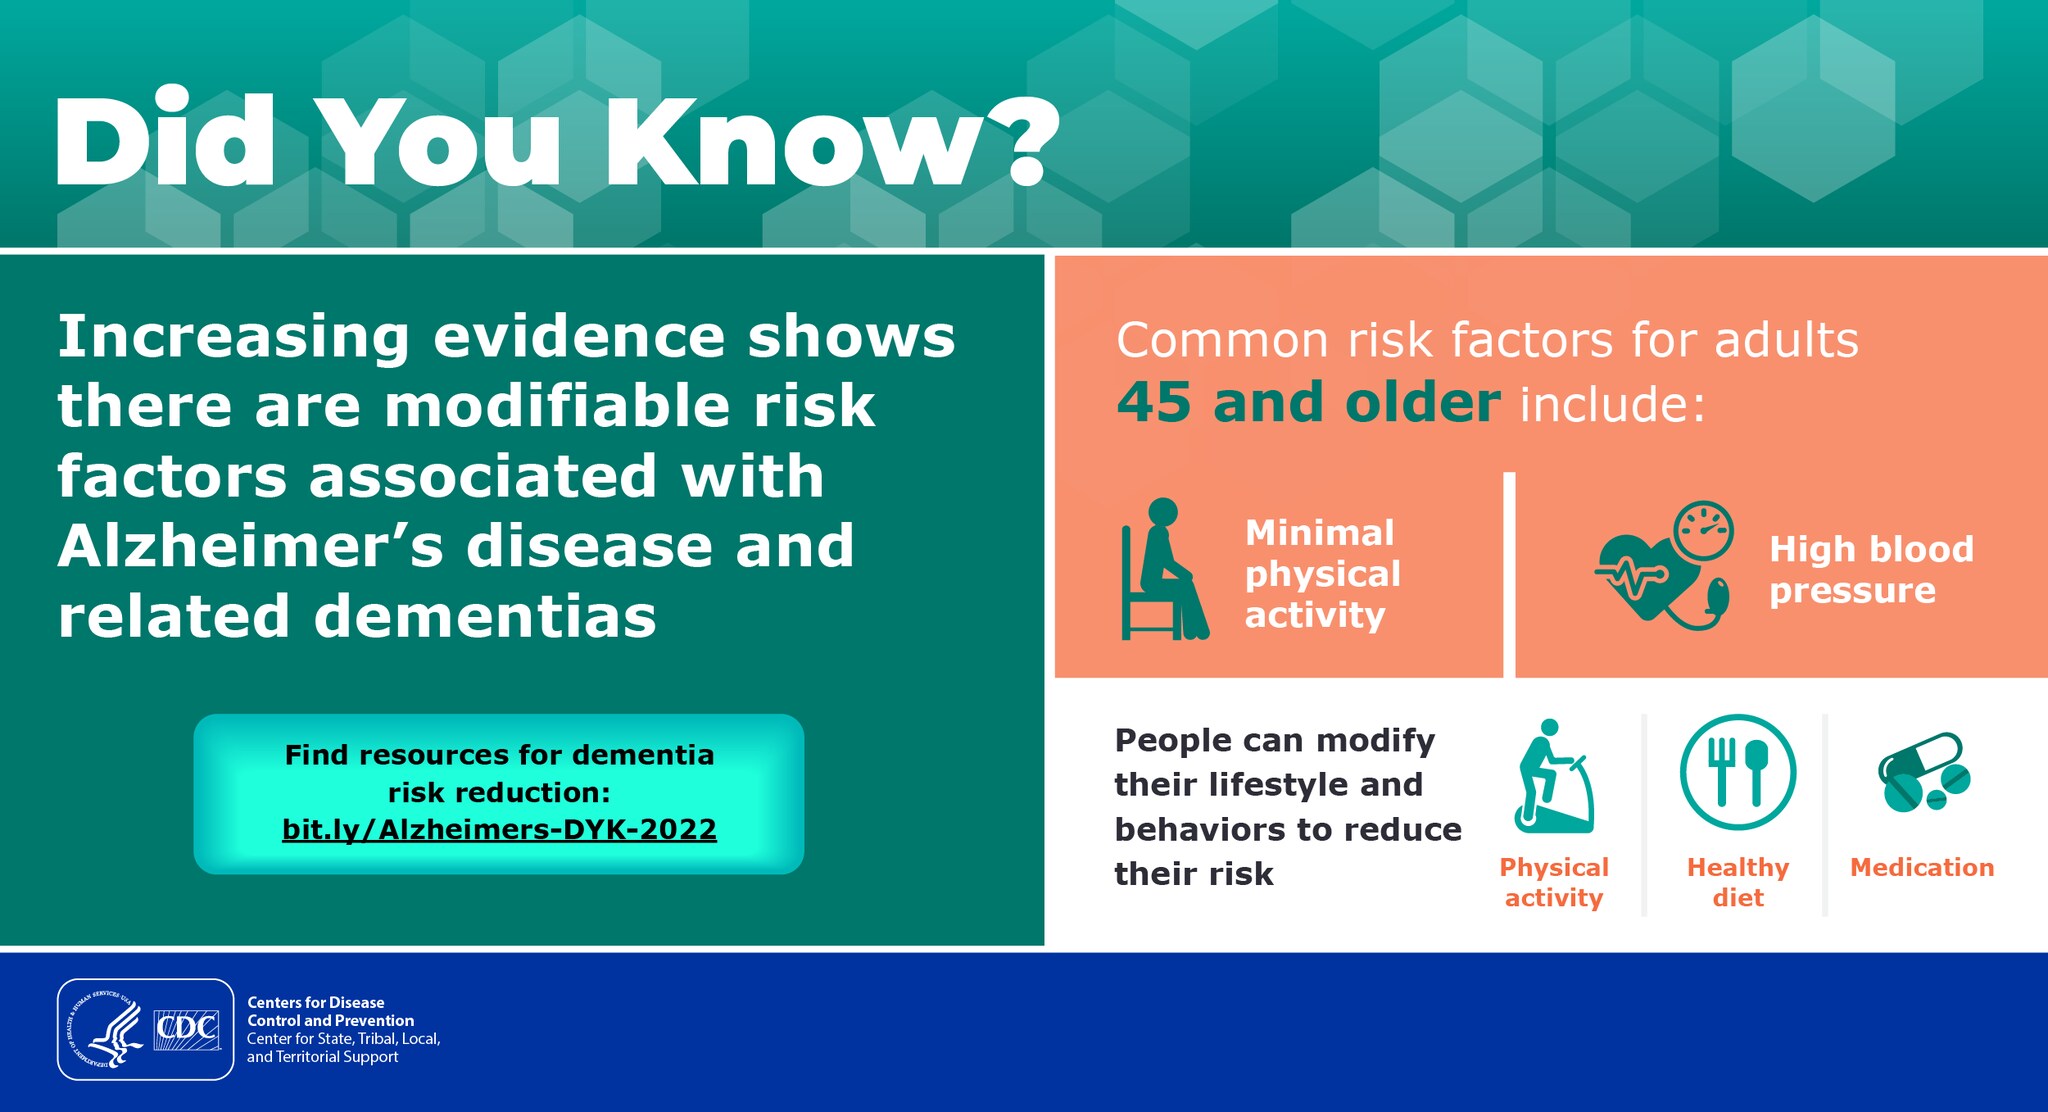 An infographic titled Did You Know? Text says: Increasing evidence shows there are modifiable risk factors associated with Alzheimer’s disease and related dementias (ADRD). Common risk factors for adults 45 and older include minimal physical activity and high blood pressure. Learn how people can modify their lifestyle and behaviors to reduce their risk at bit.ly/Alzheimers-DYK-2022.